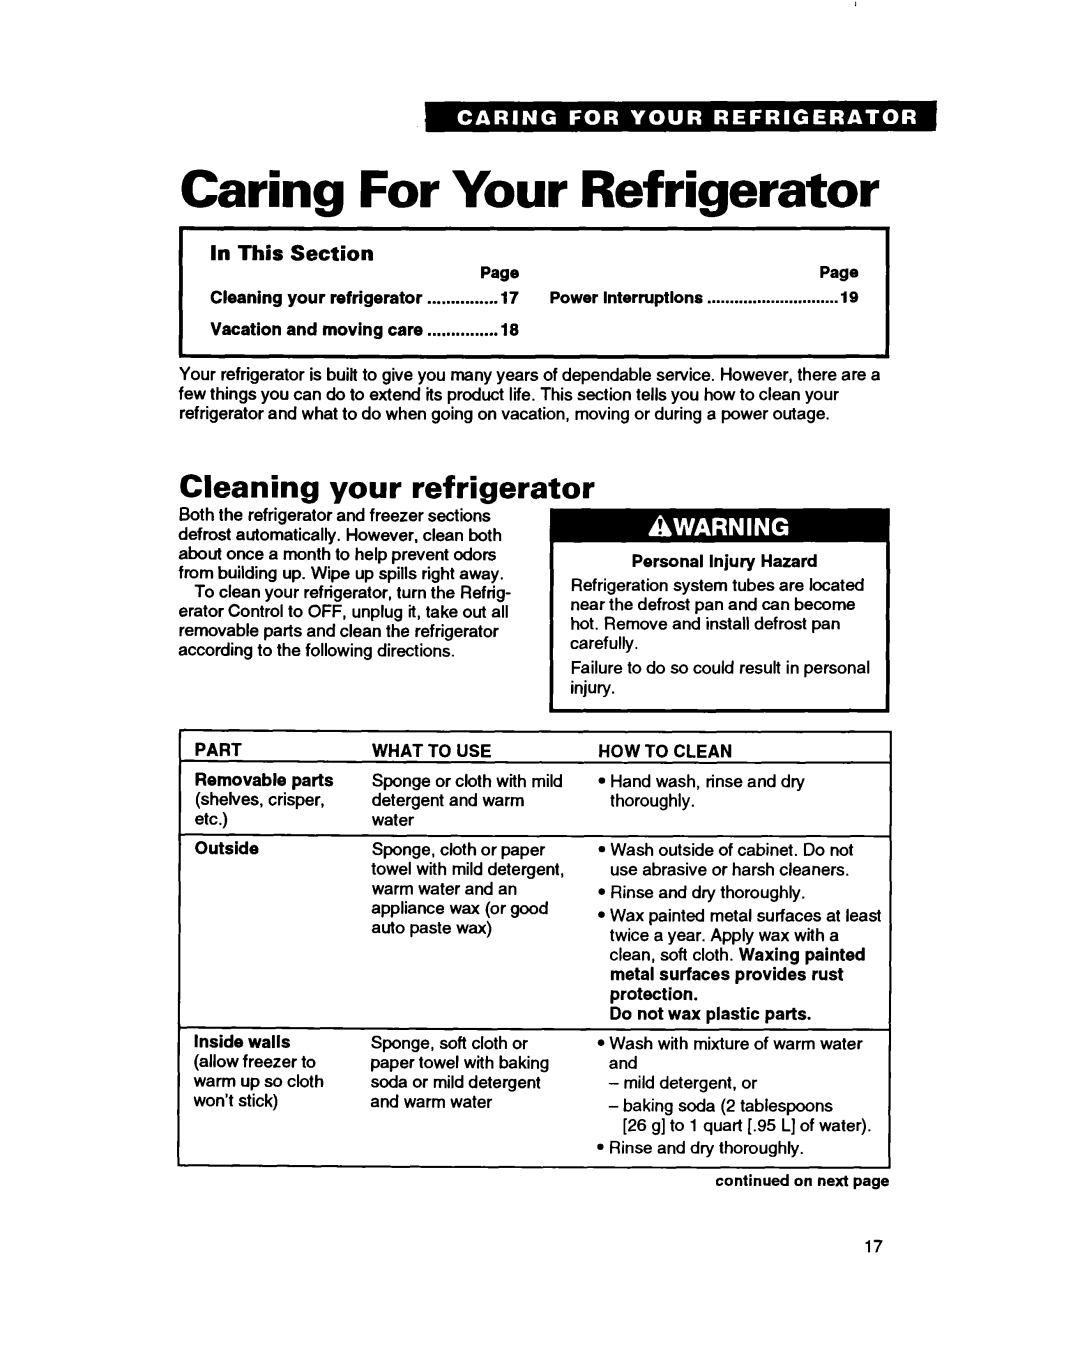 Whirlpool RT18DK, RT18BM Caring For Your Refrigerator, Cleaning your refrigerator, In This, Section, Vacation, What To Use 